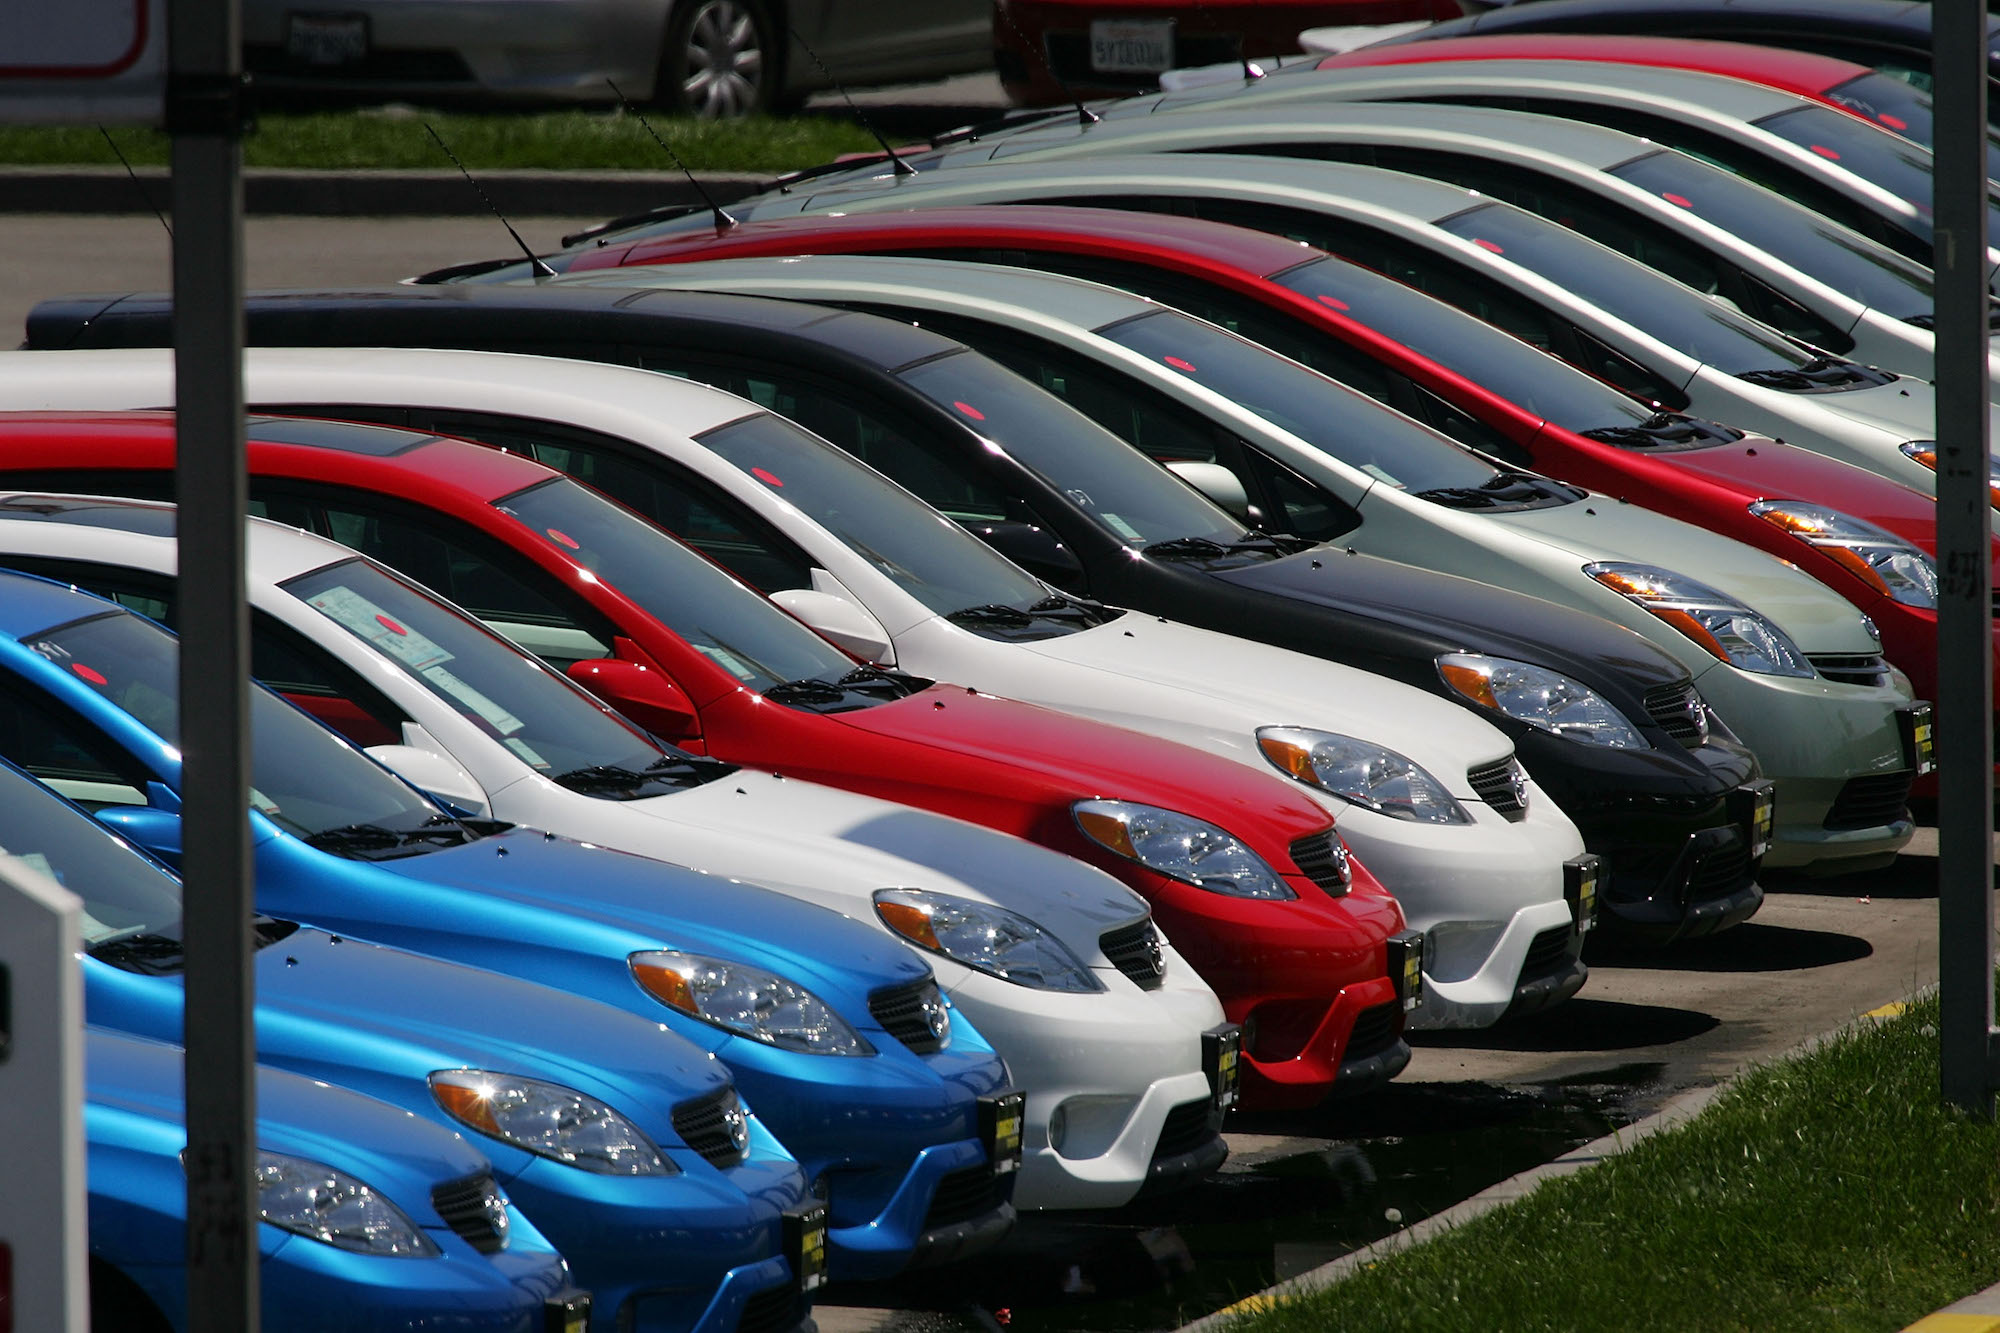 A row of Toyota vehicles in various car colors are parked in a line at the world's largest auto dealership, Longo Toyota, on April 24, 2007, in El Monte, California